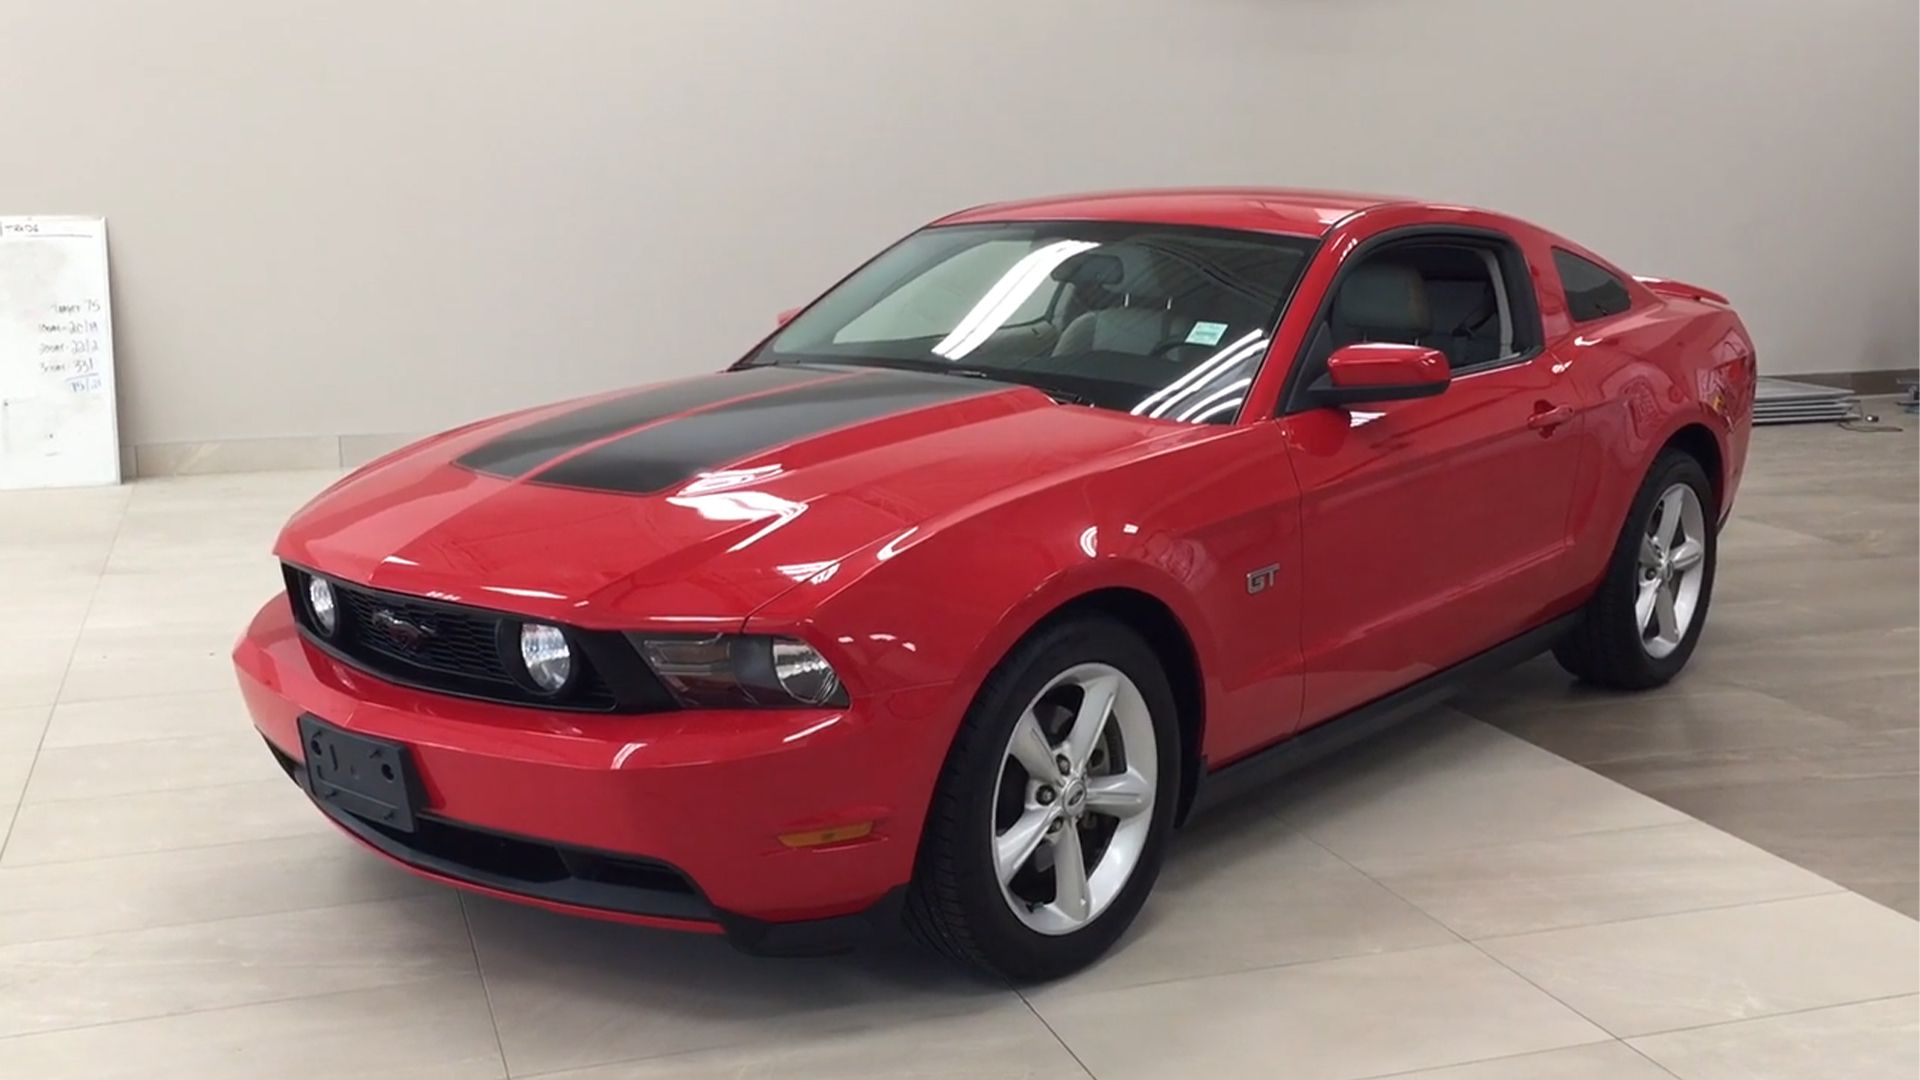 red 2010 Ford Mustang GT parked indoors